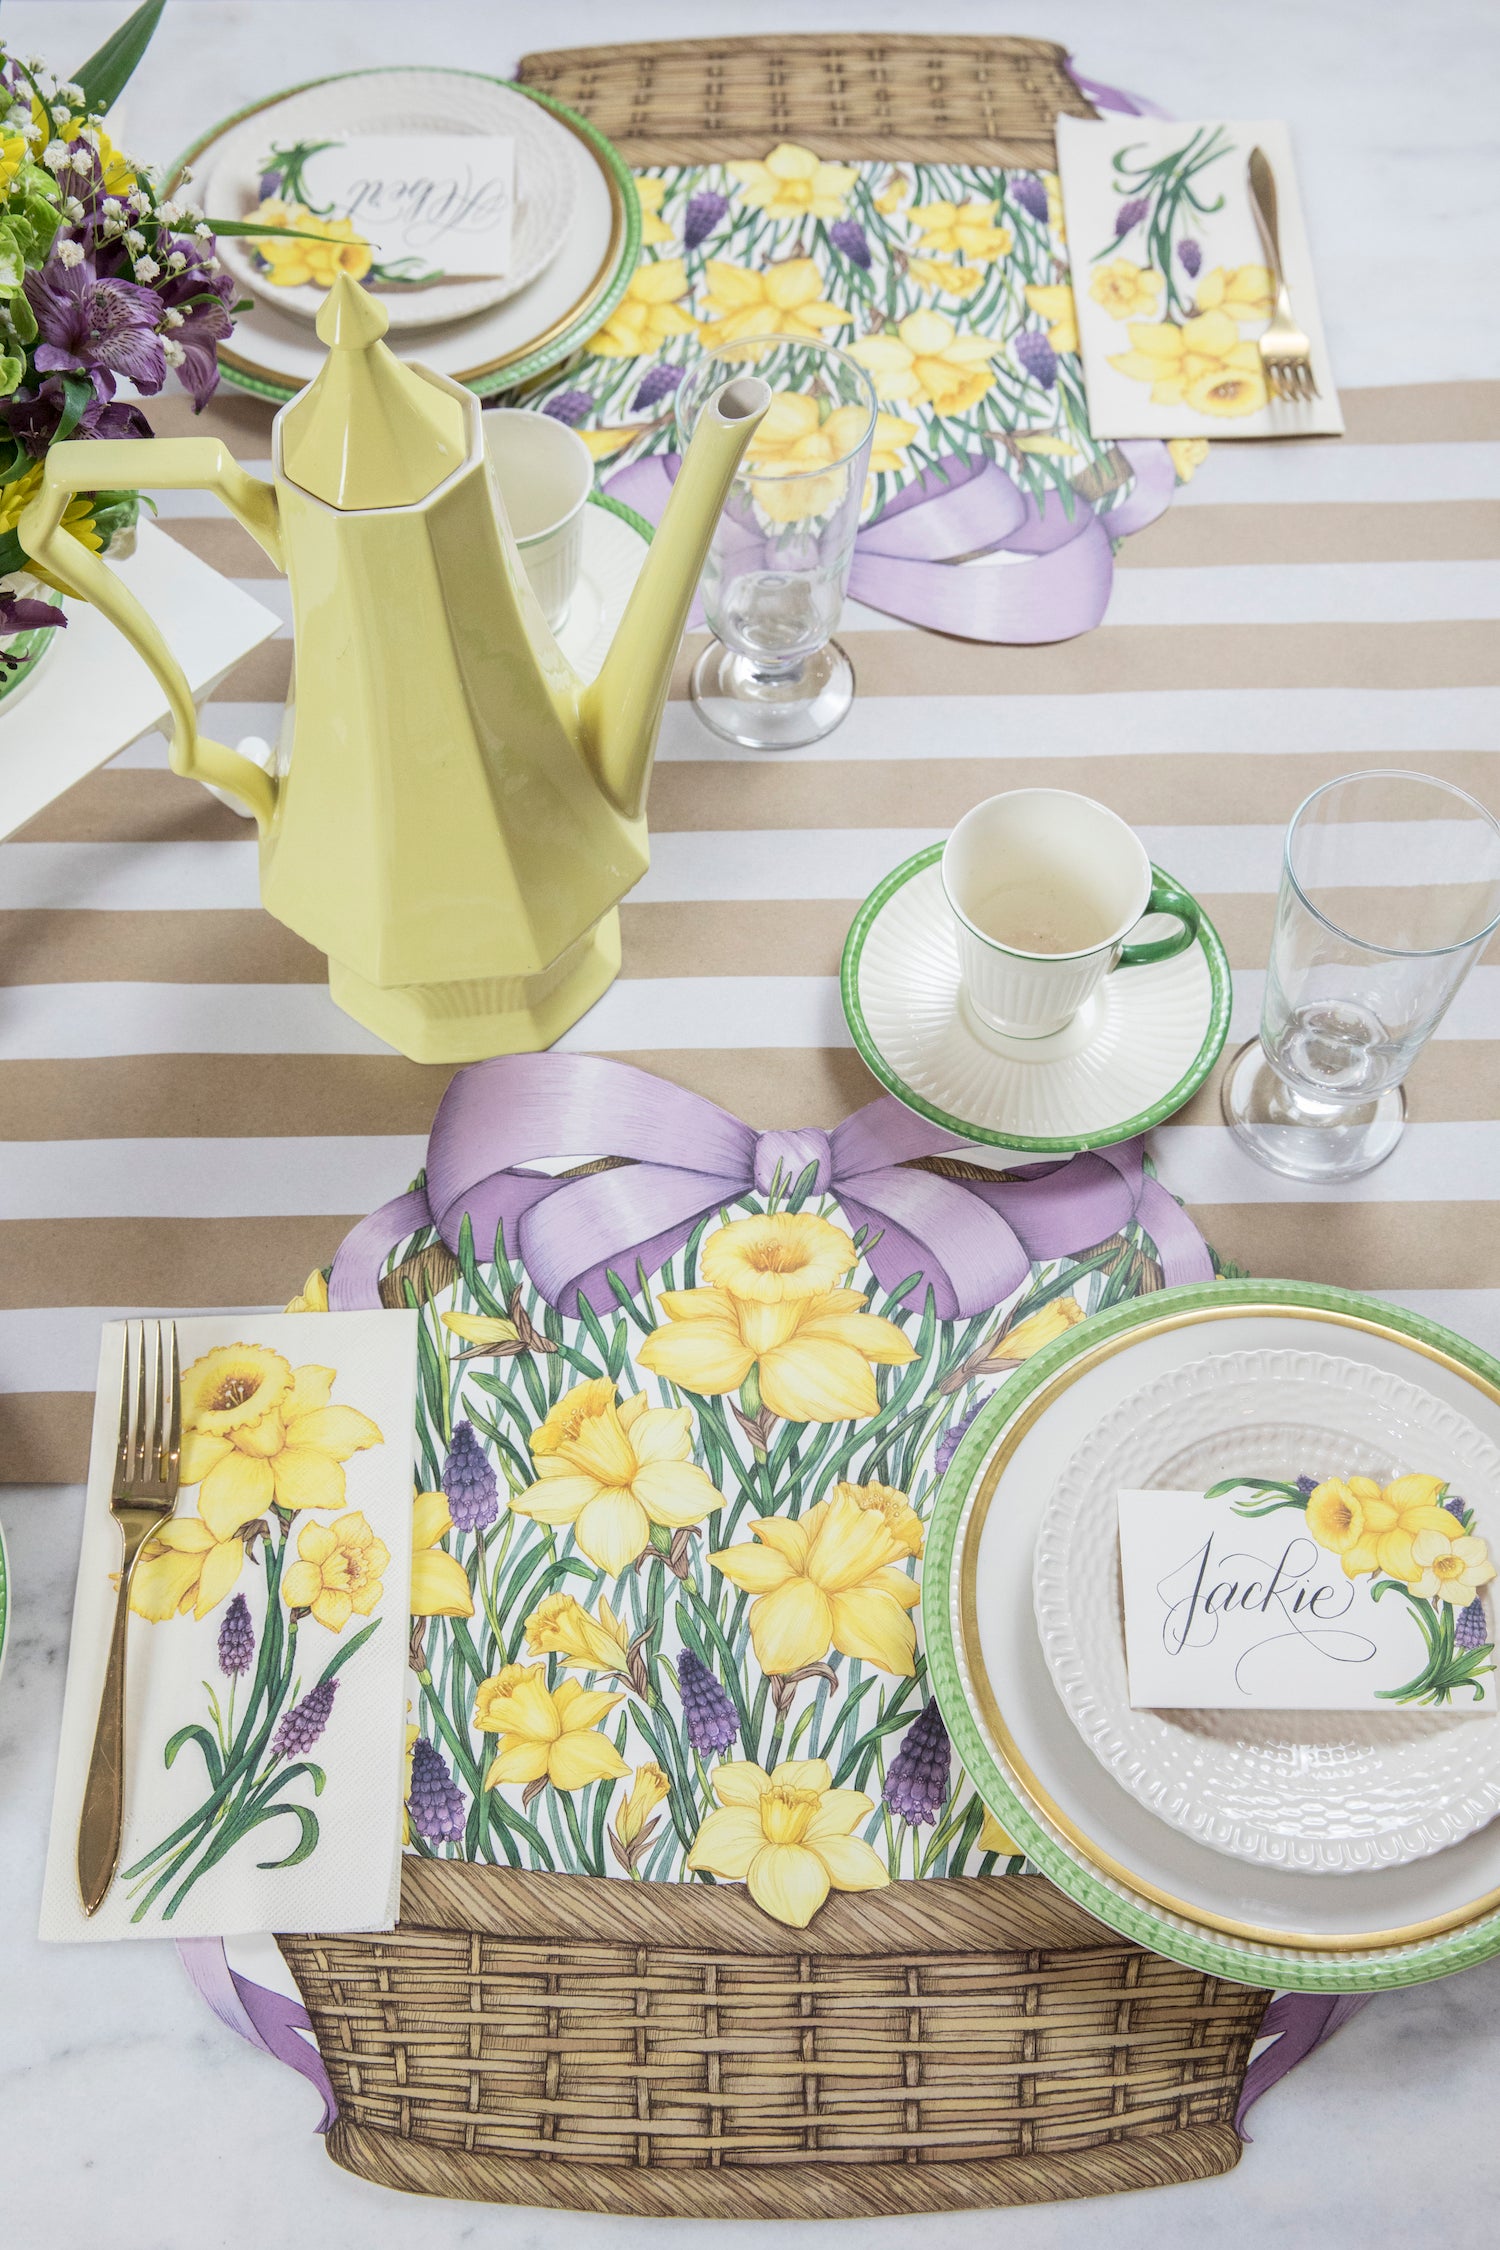 The Die-cut Daffodil Basket Placemat under an elegant Easter table setting.